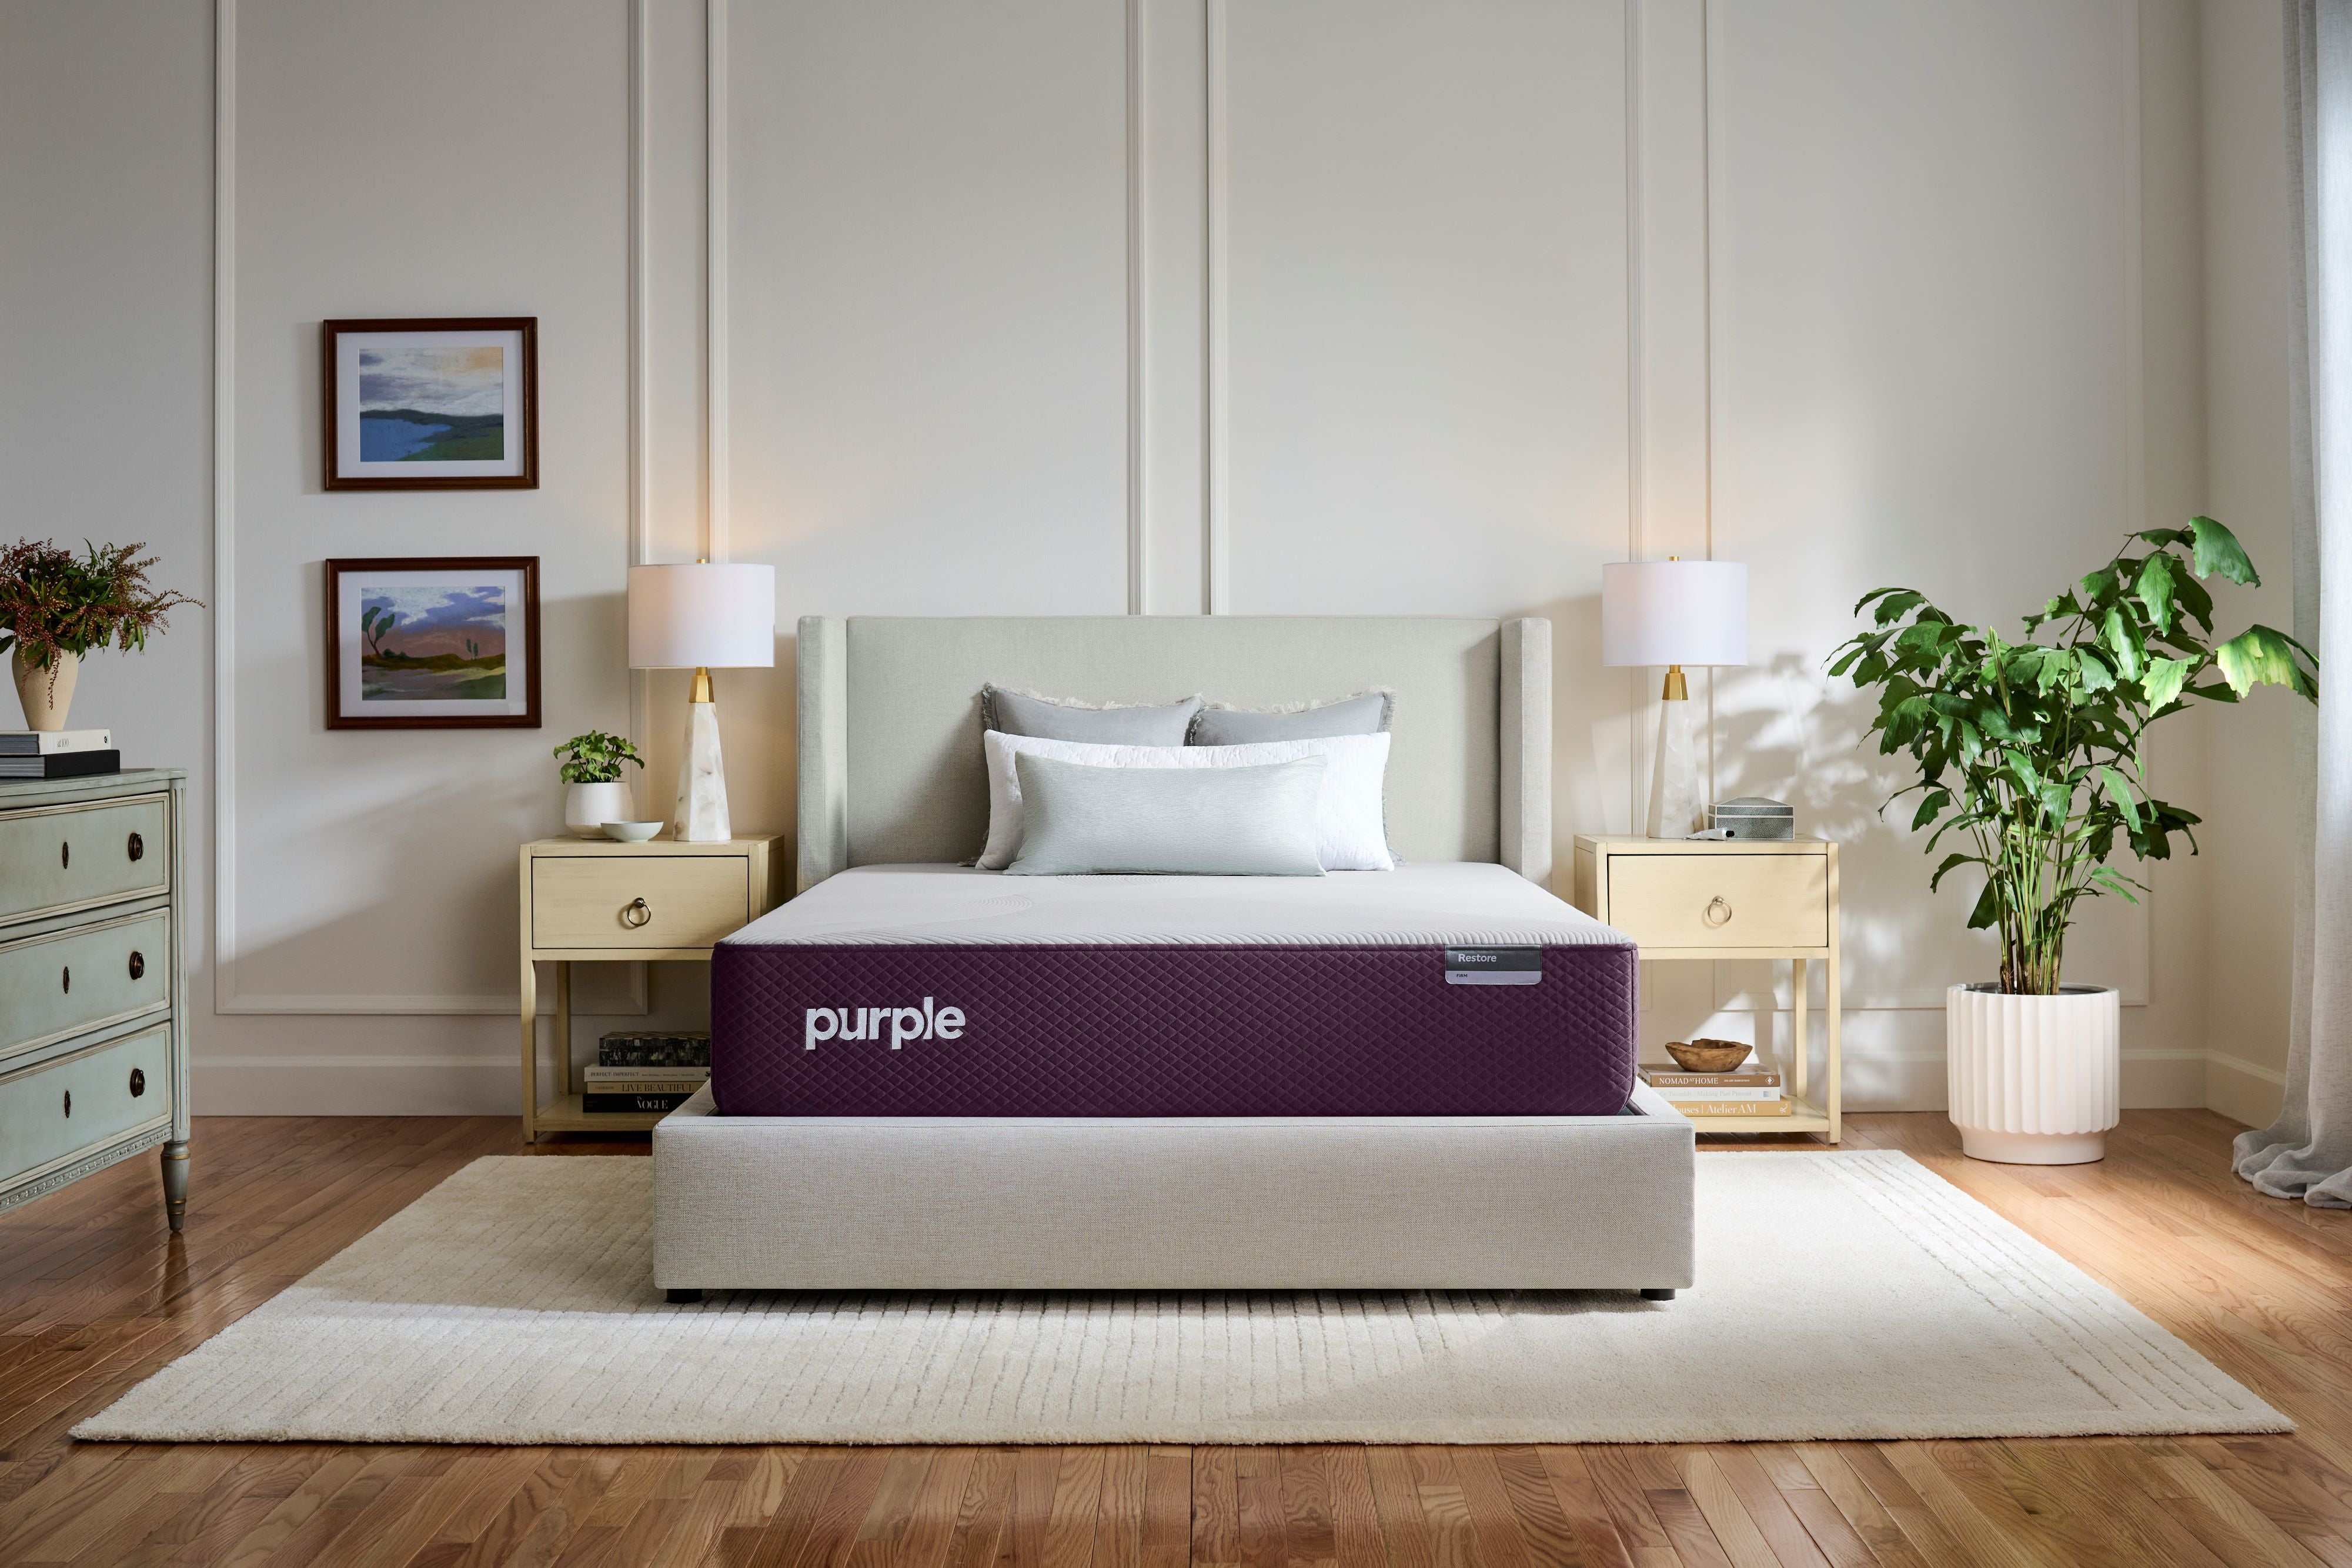 Purple Premium Restore mattress in a beautiful room seen from the front